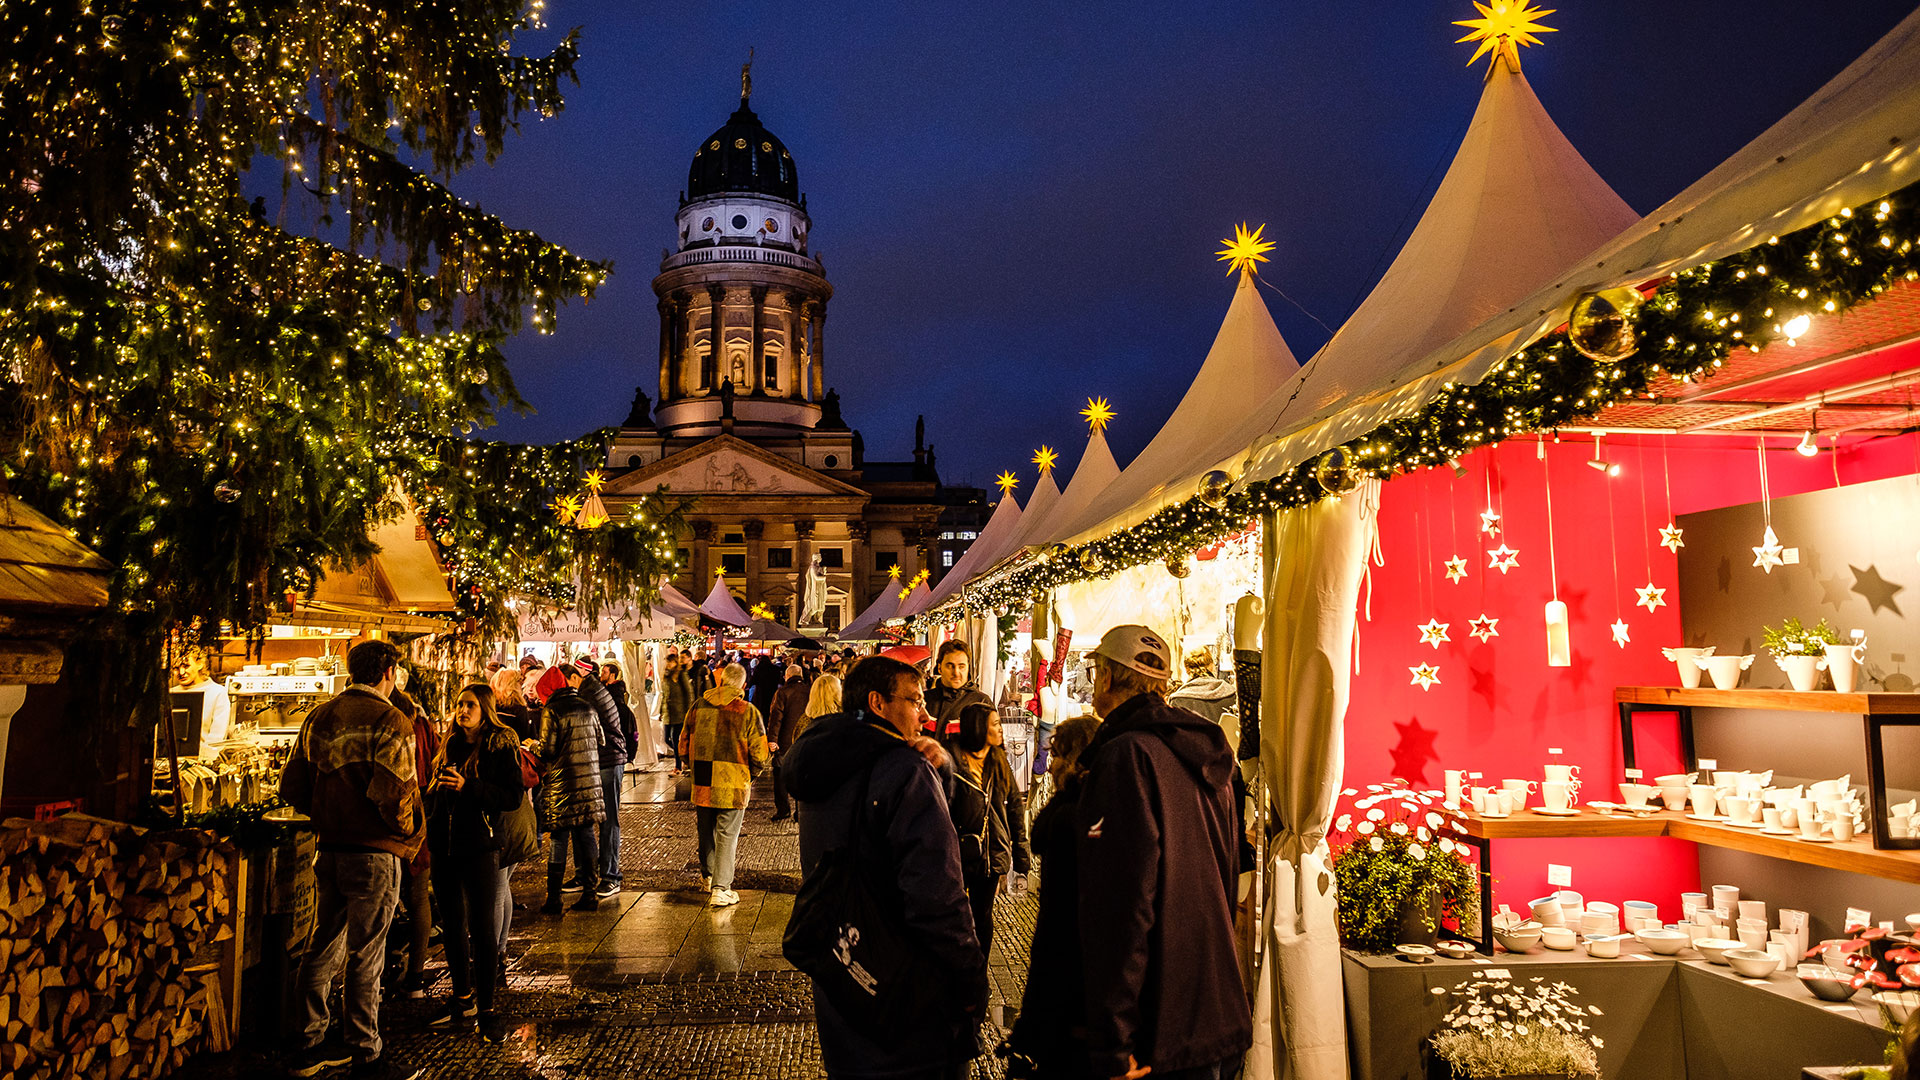 Shoppers browse the stalls at a Christmas market in Germany.